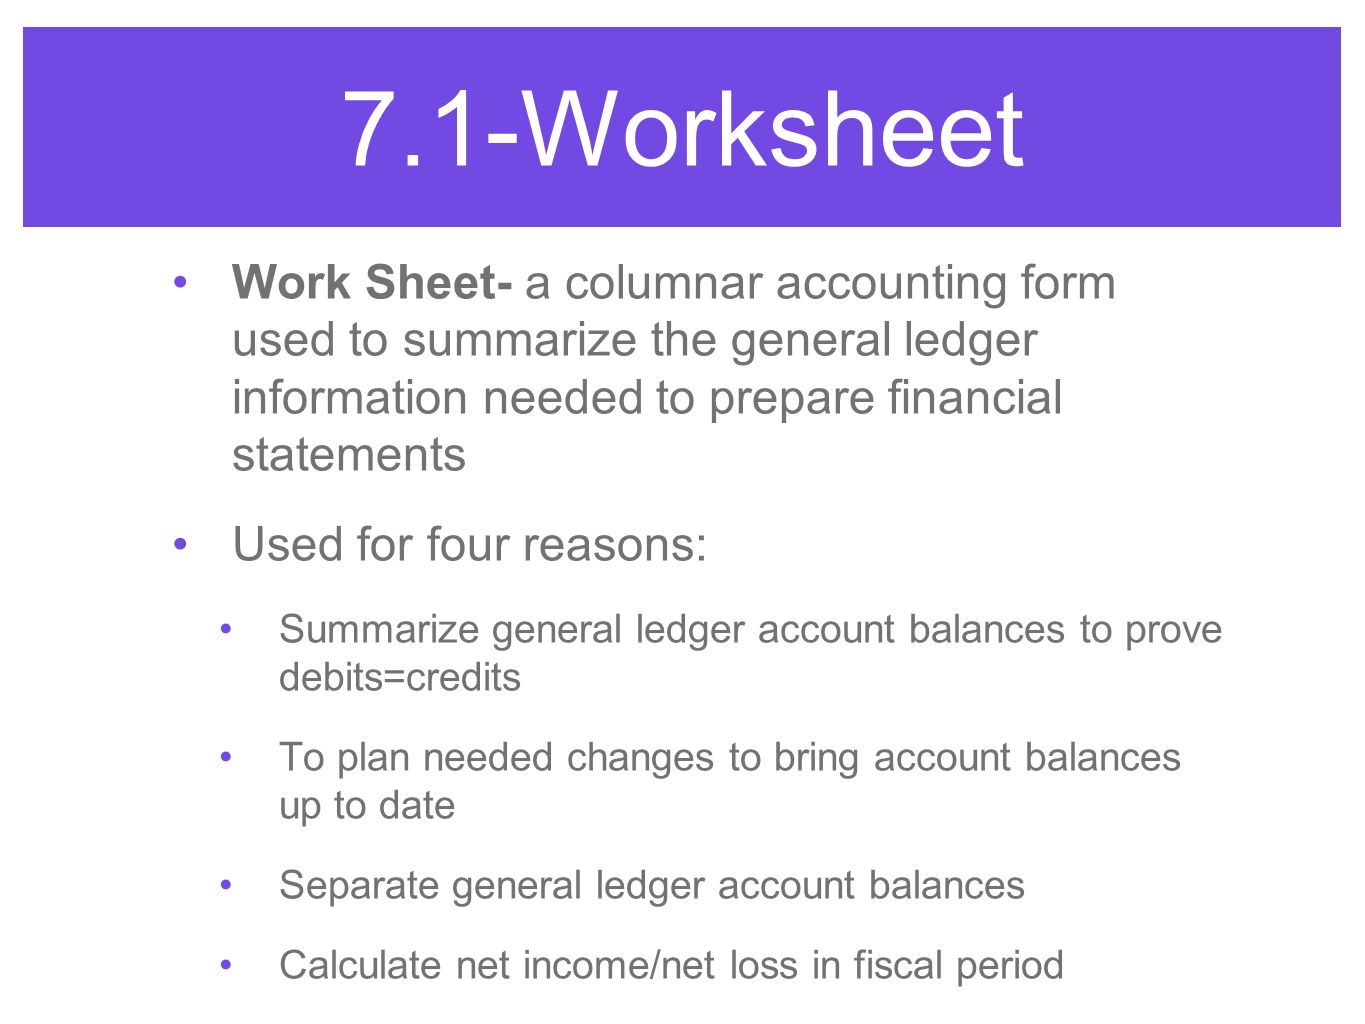 7.1-Worksheet Work Sheet- a columnar accounting form used to summarize the general ledger information needed to prepare financial statements.